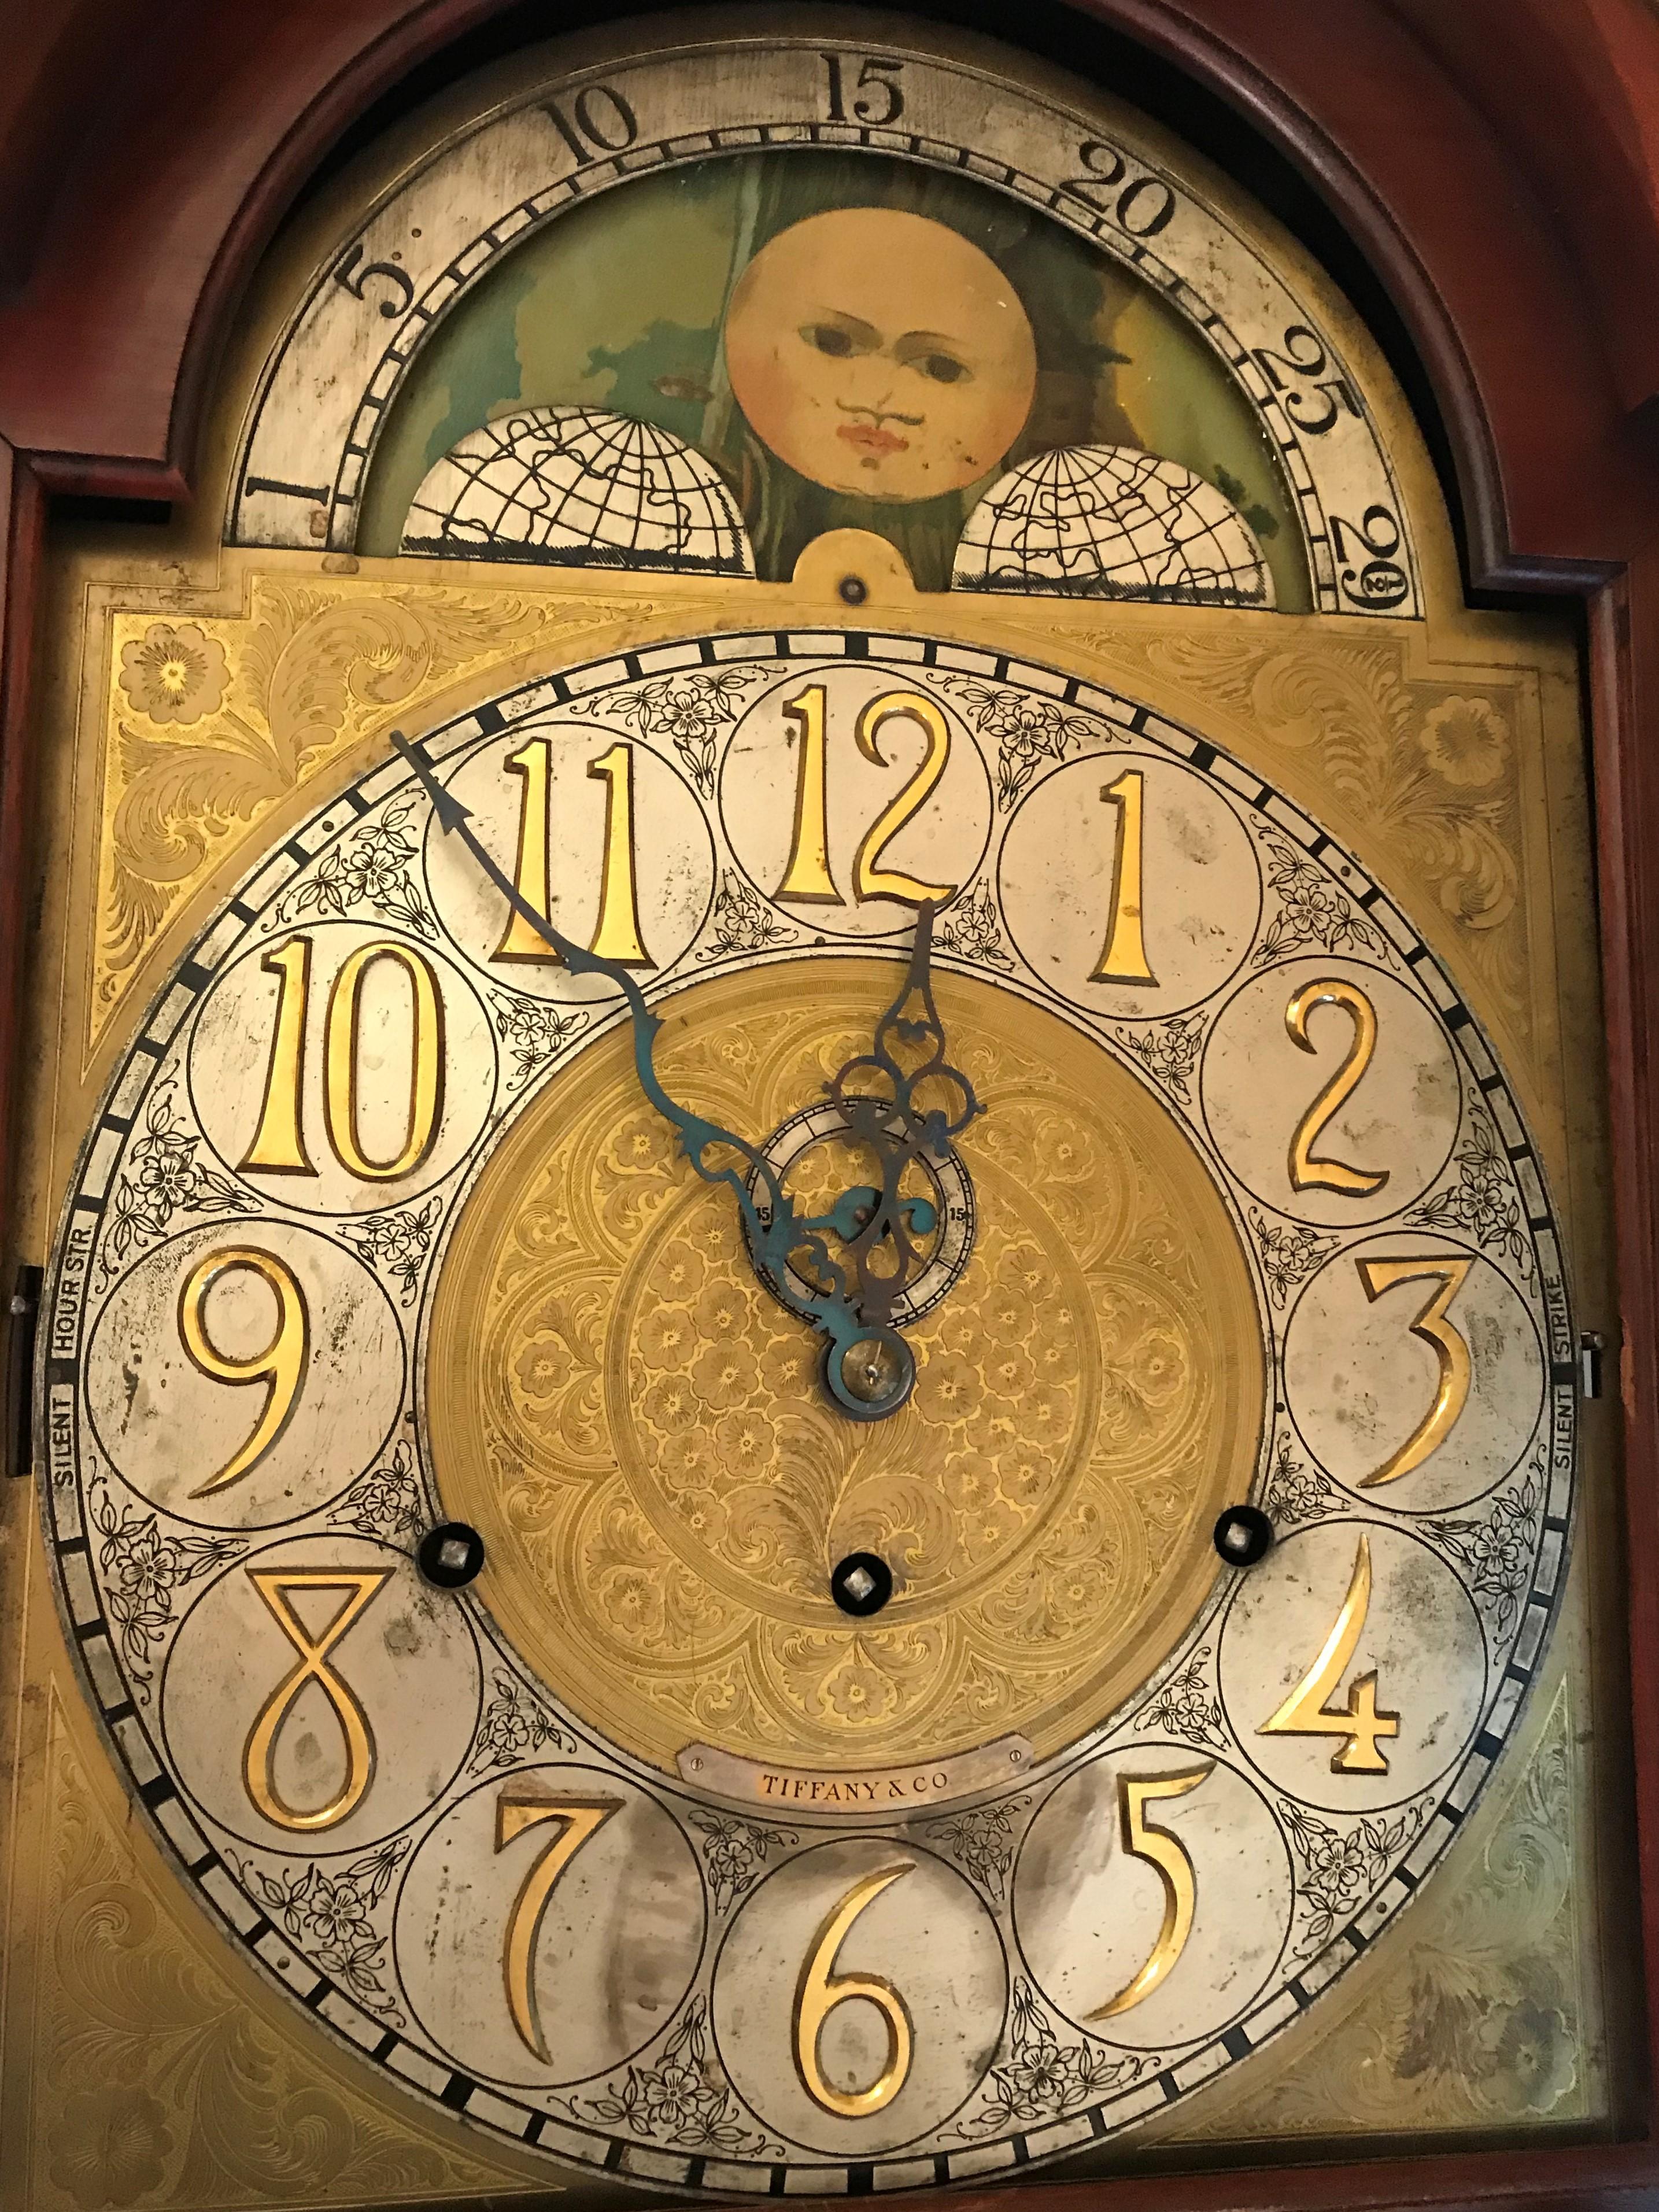 Grandfather clock. Mahogany case. Westminster Chimes, circa 1900-1910.

Face stamped with retailer Tiffany & Co. Phases of moon lunar dial with scene of ships and house in landscape.

Strikes on hour, half hour, and quarter hour. Westminster